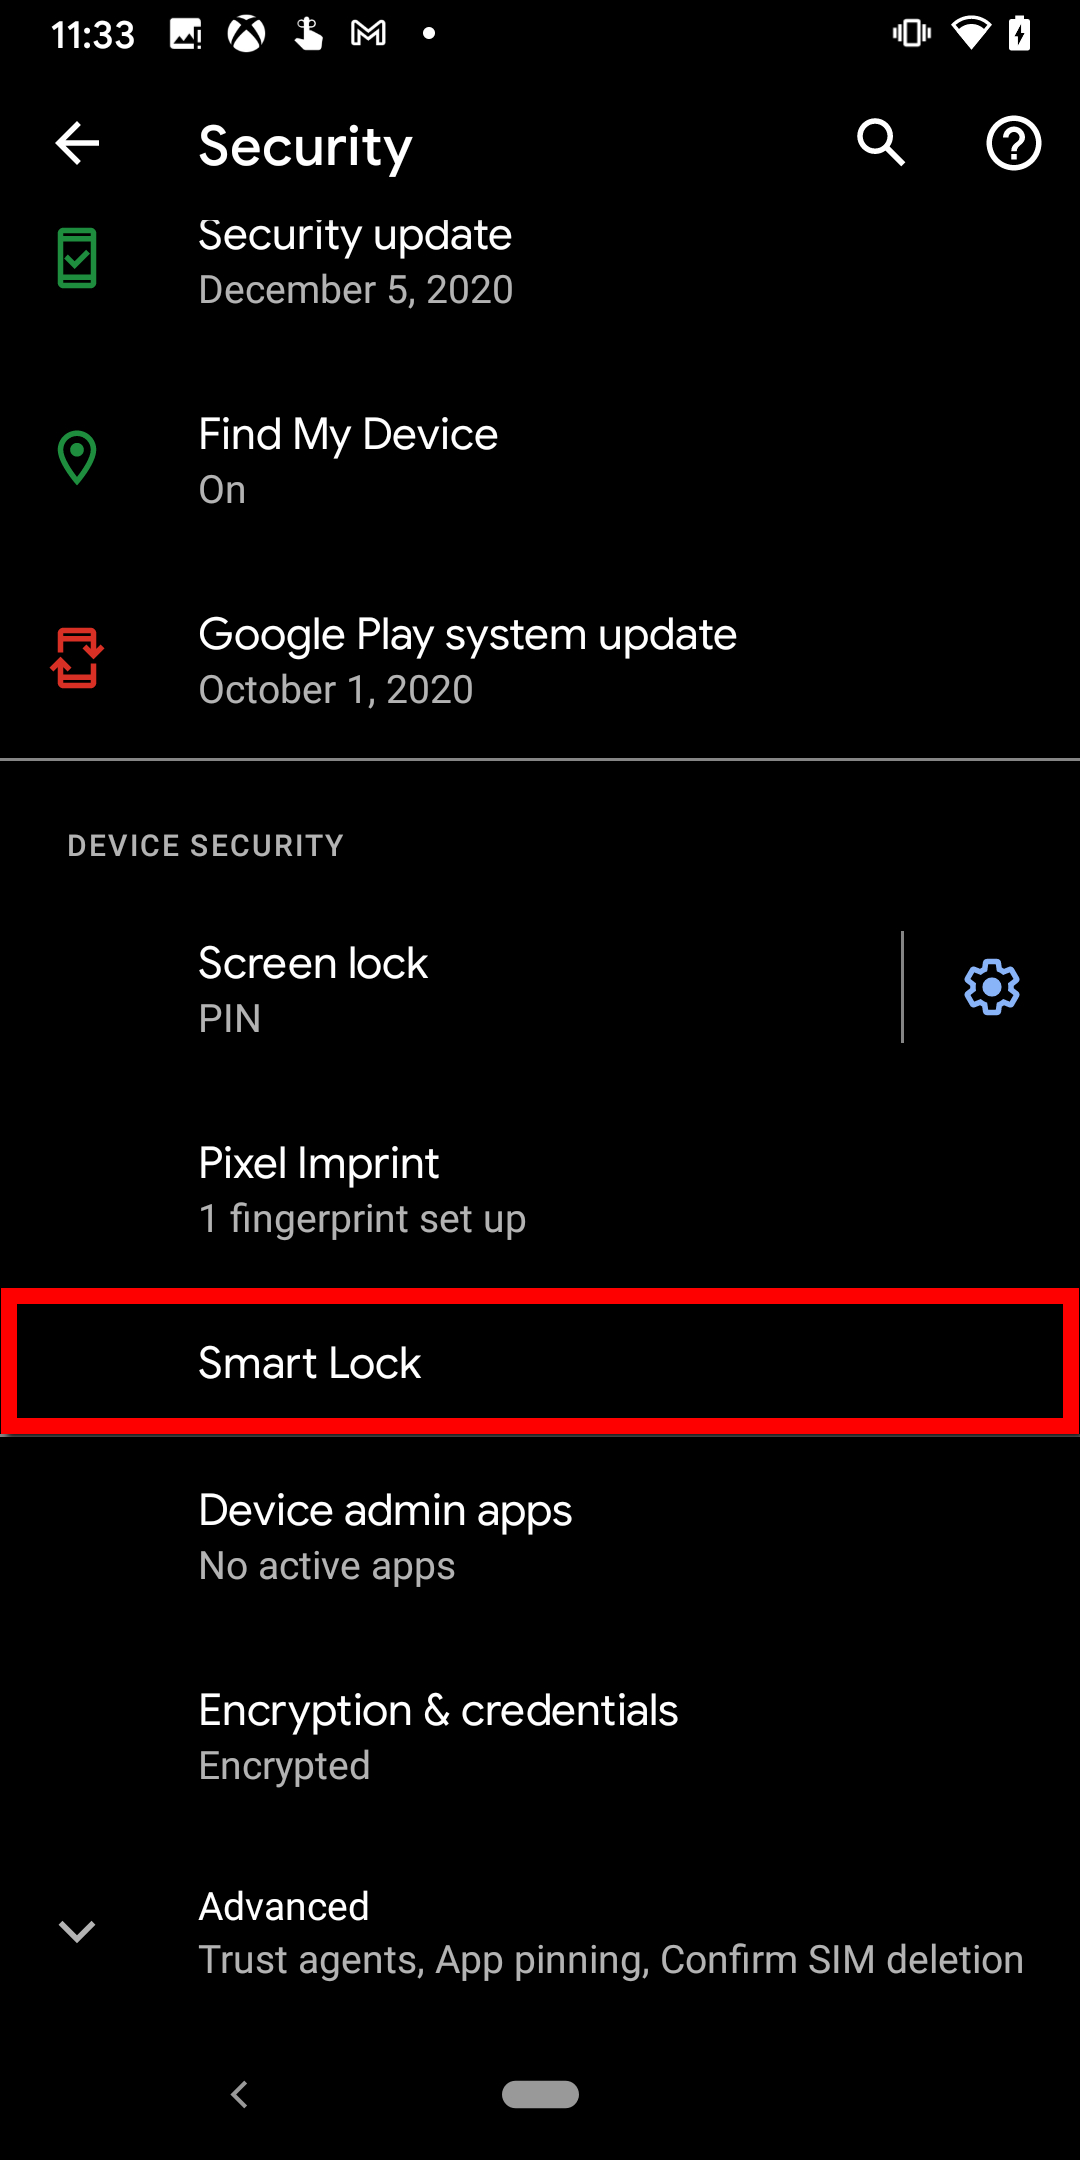 How to Enable or Disable Smart Lock on Android